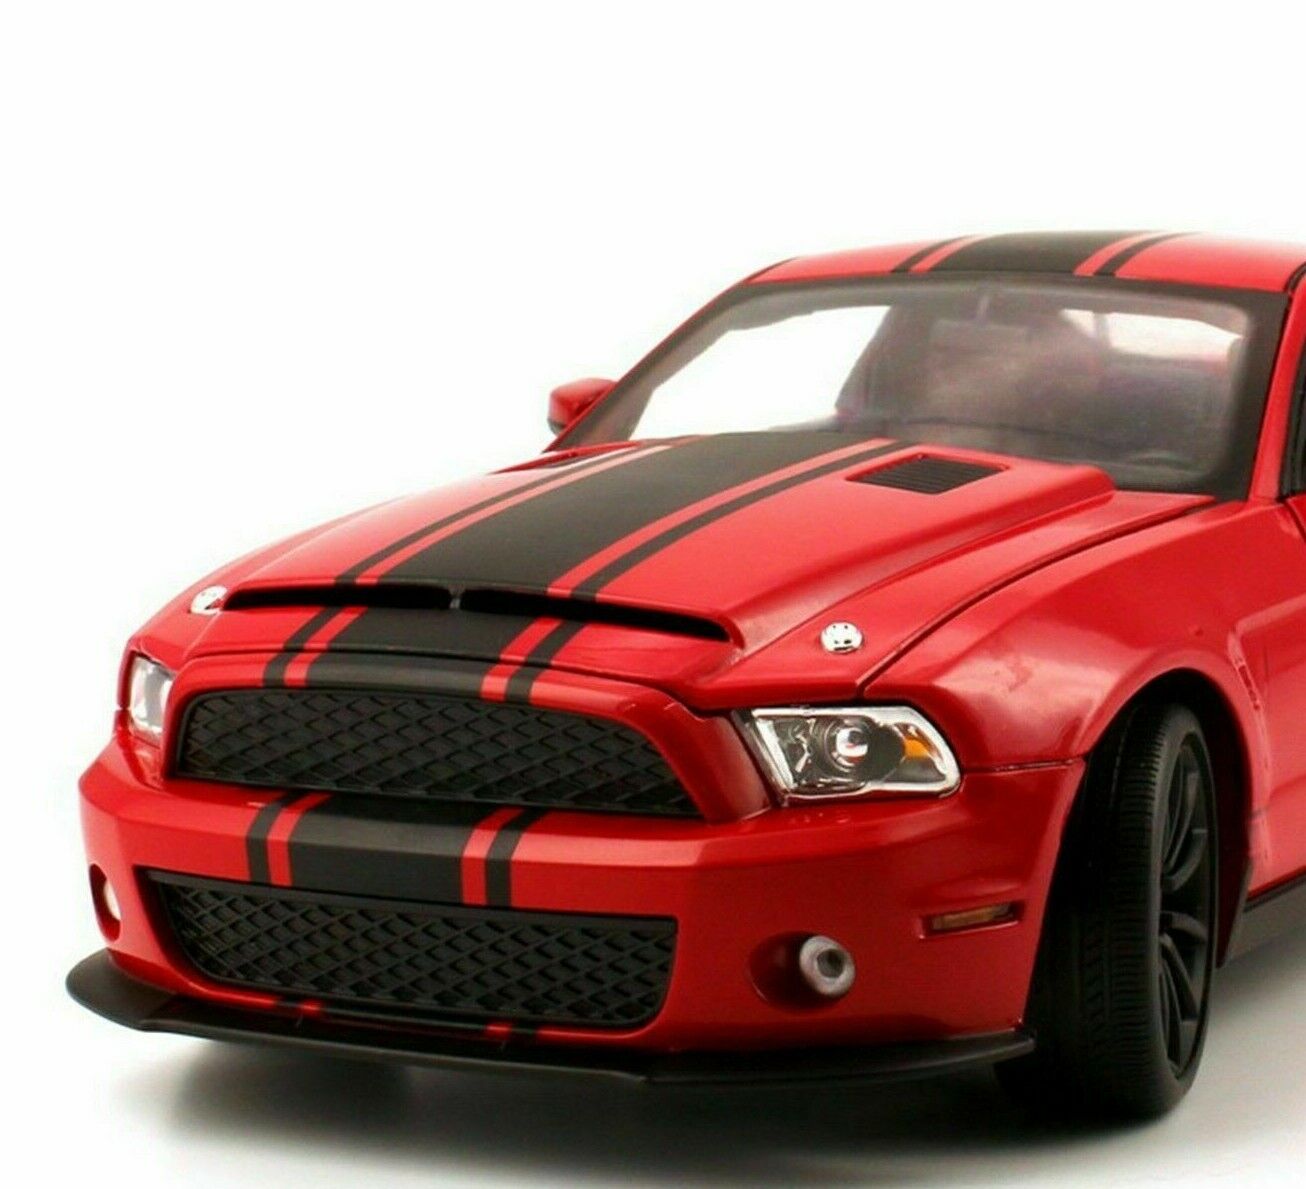 Full Body Stripe racing rally Kit for Ford Mustang Projector 2005 2006 2007 halo